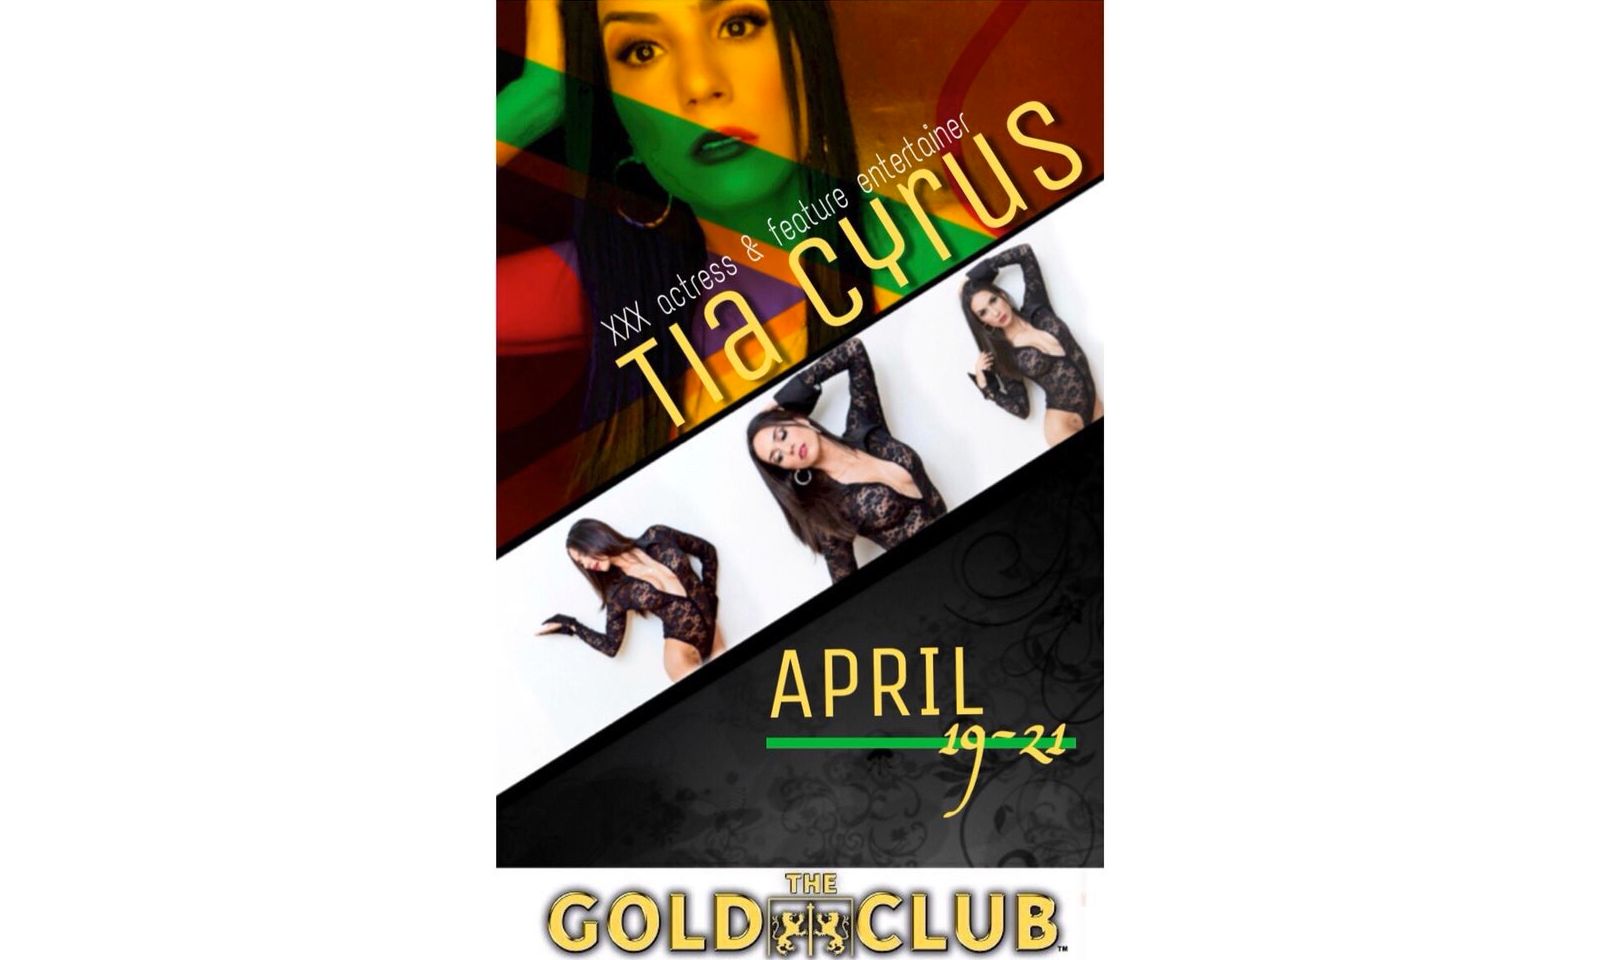 Tia Cyrus Dancing At Gold Club in Philly